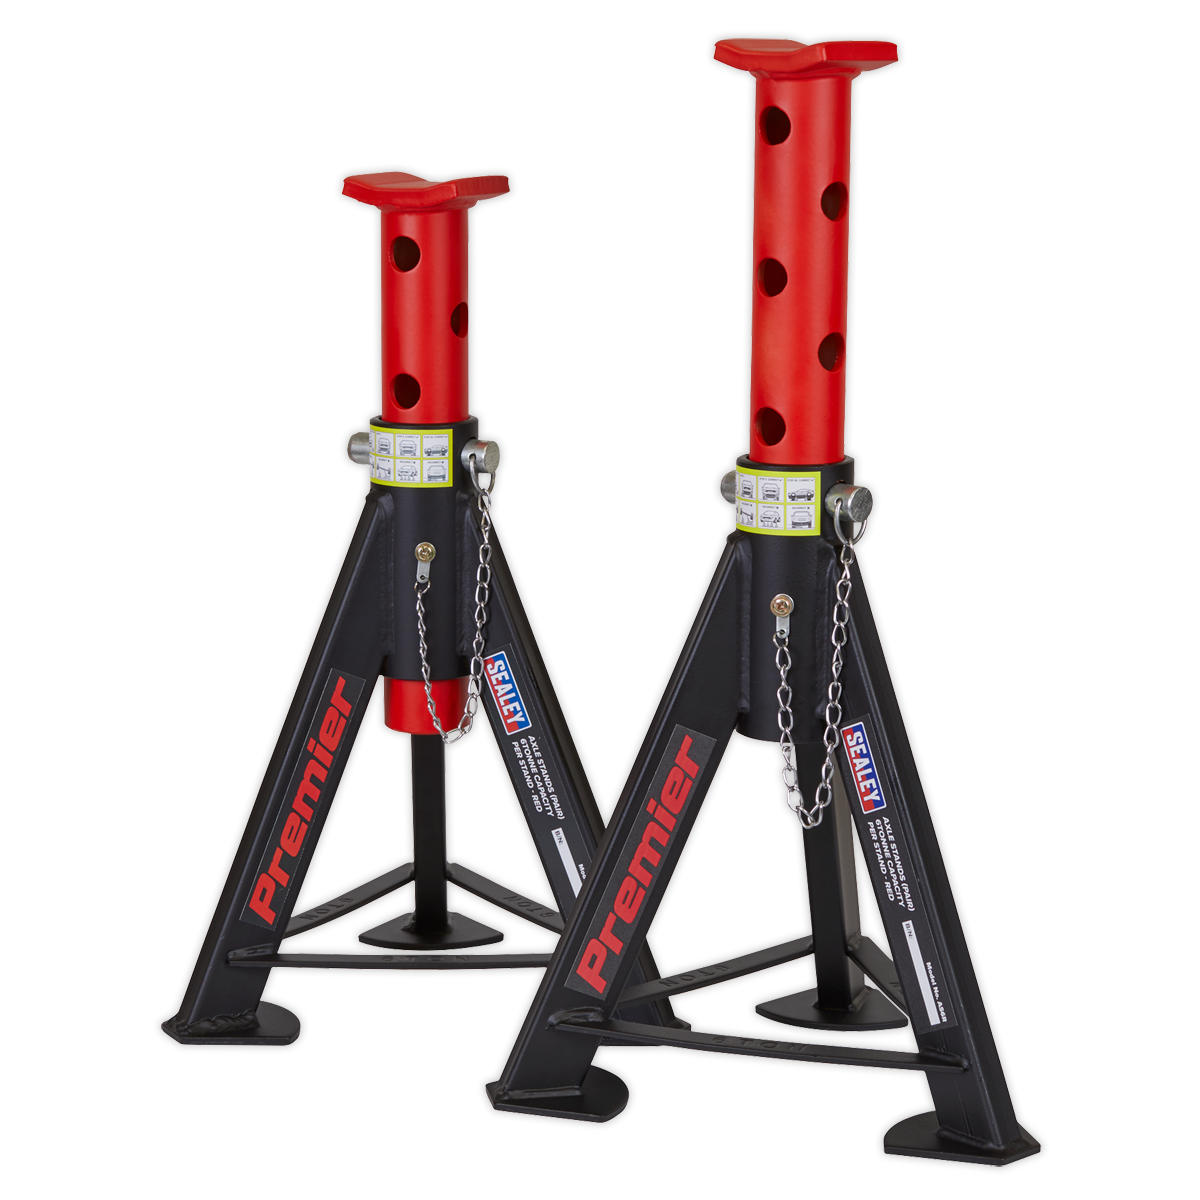 SEALEY - AS6R Axle Stands (Pair) 6tonne Capacity per Stand - Red